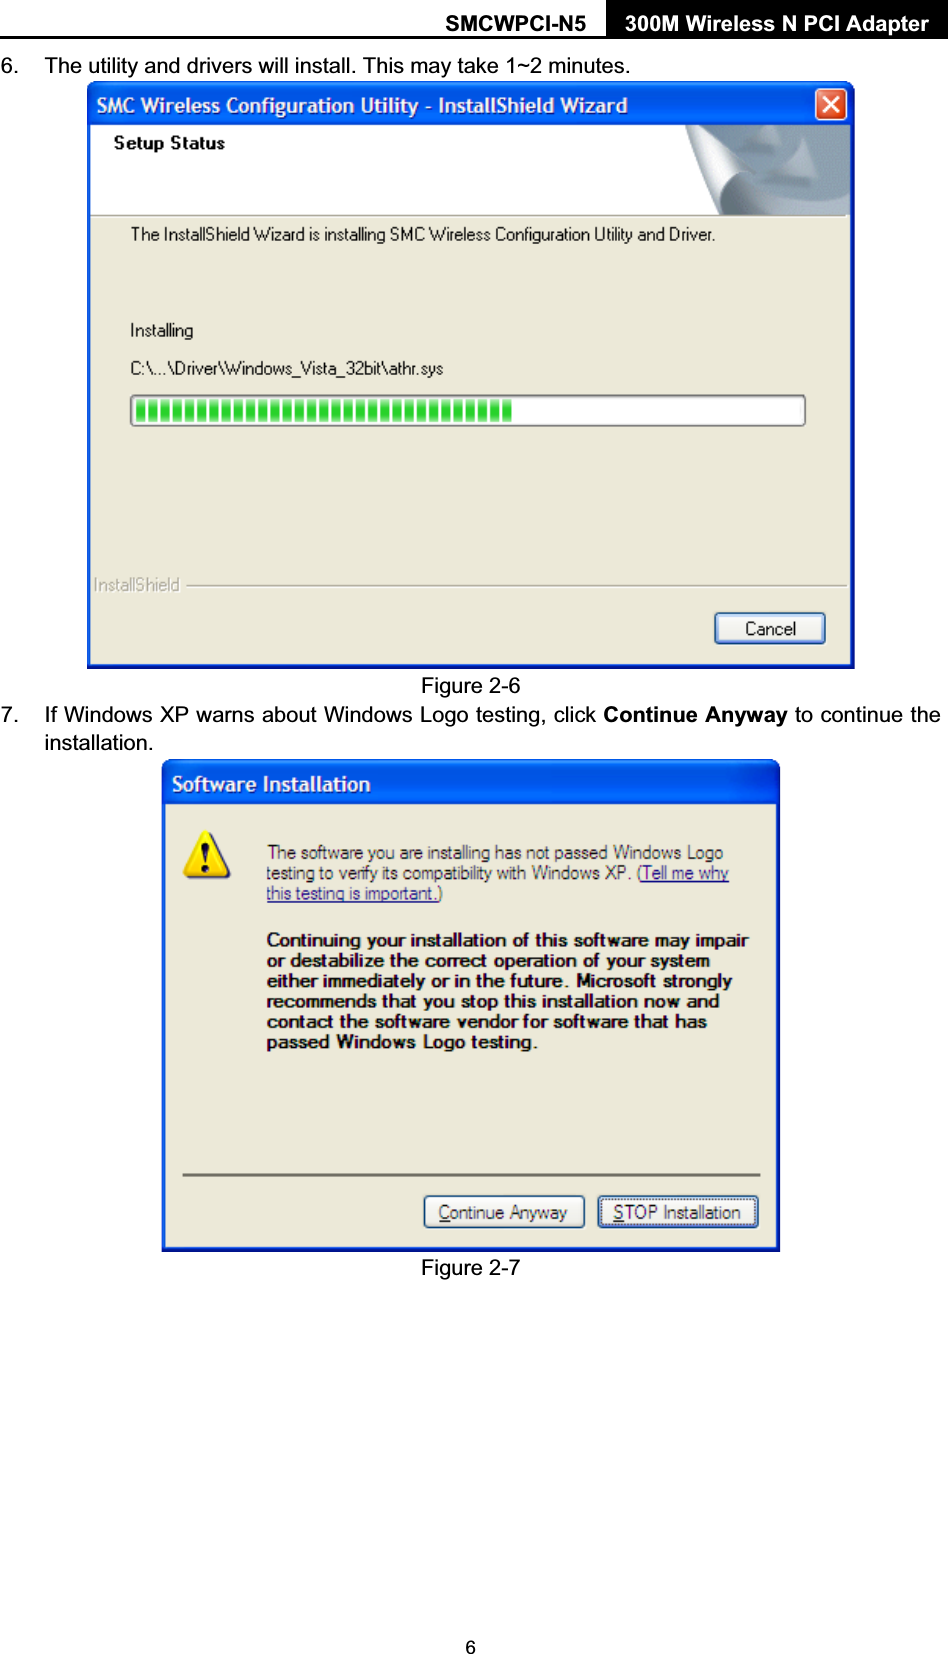 SMCWPCI-N5  300M Wireless N PCI Adapter  6 6.  The utility and drivers will install. This may take 1~2 minutes.  Figure 2-6 7.  If Windows XP warns about Windows Logo testing, click Continue Anyway to continue the installation.  Figure 2-7  